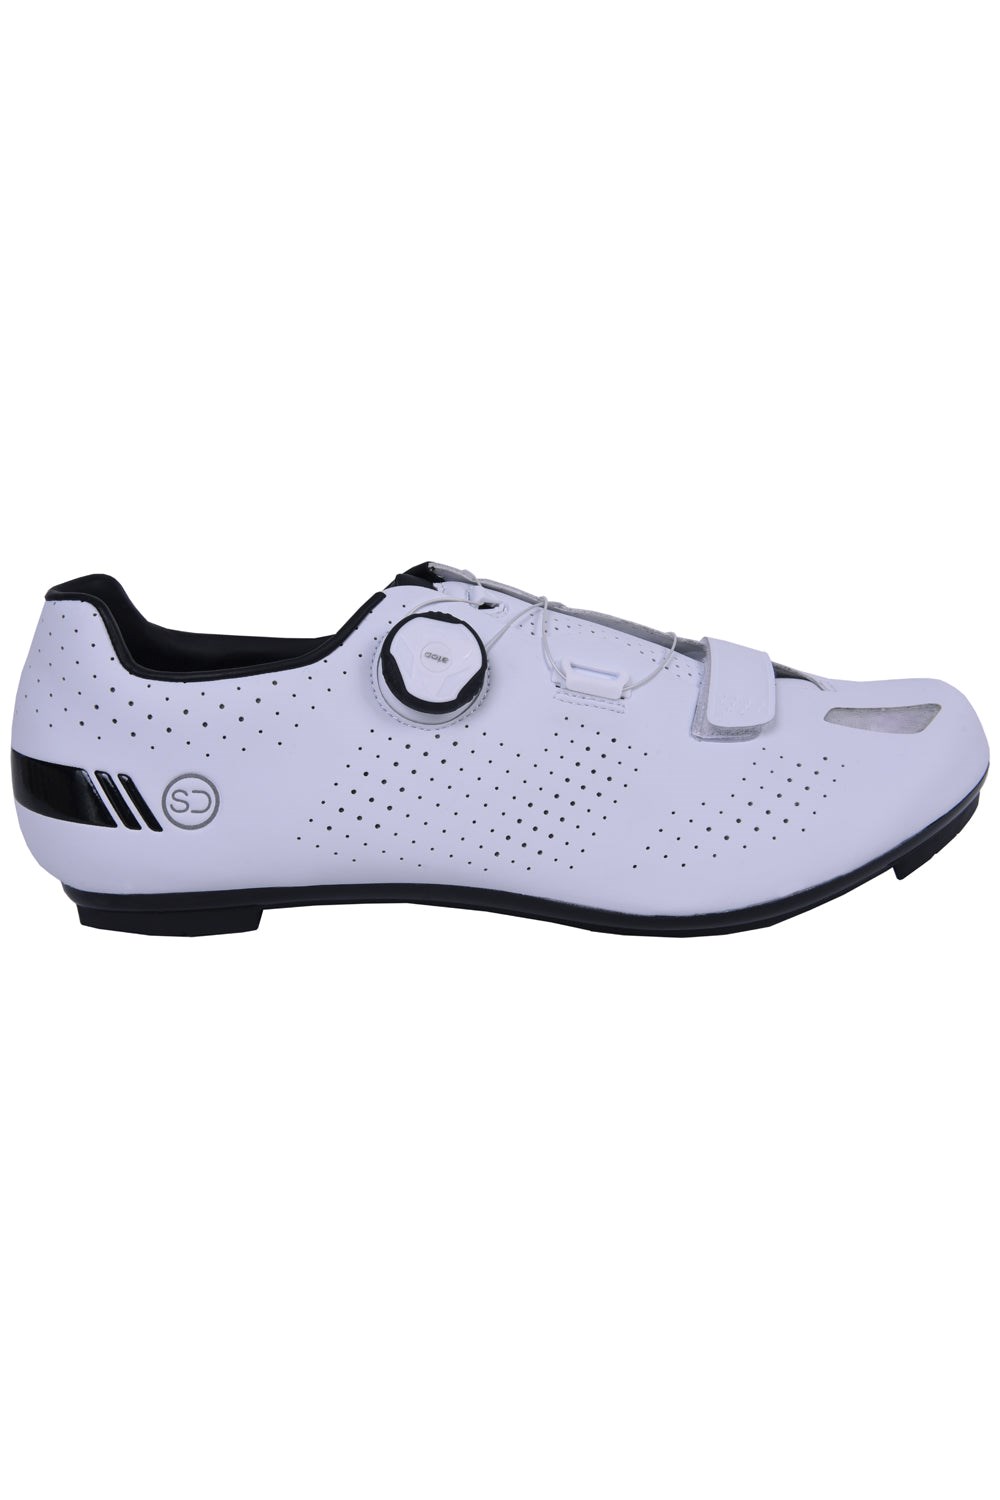 Mens S-GT3 Road Cycle Shoes -